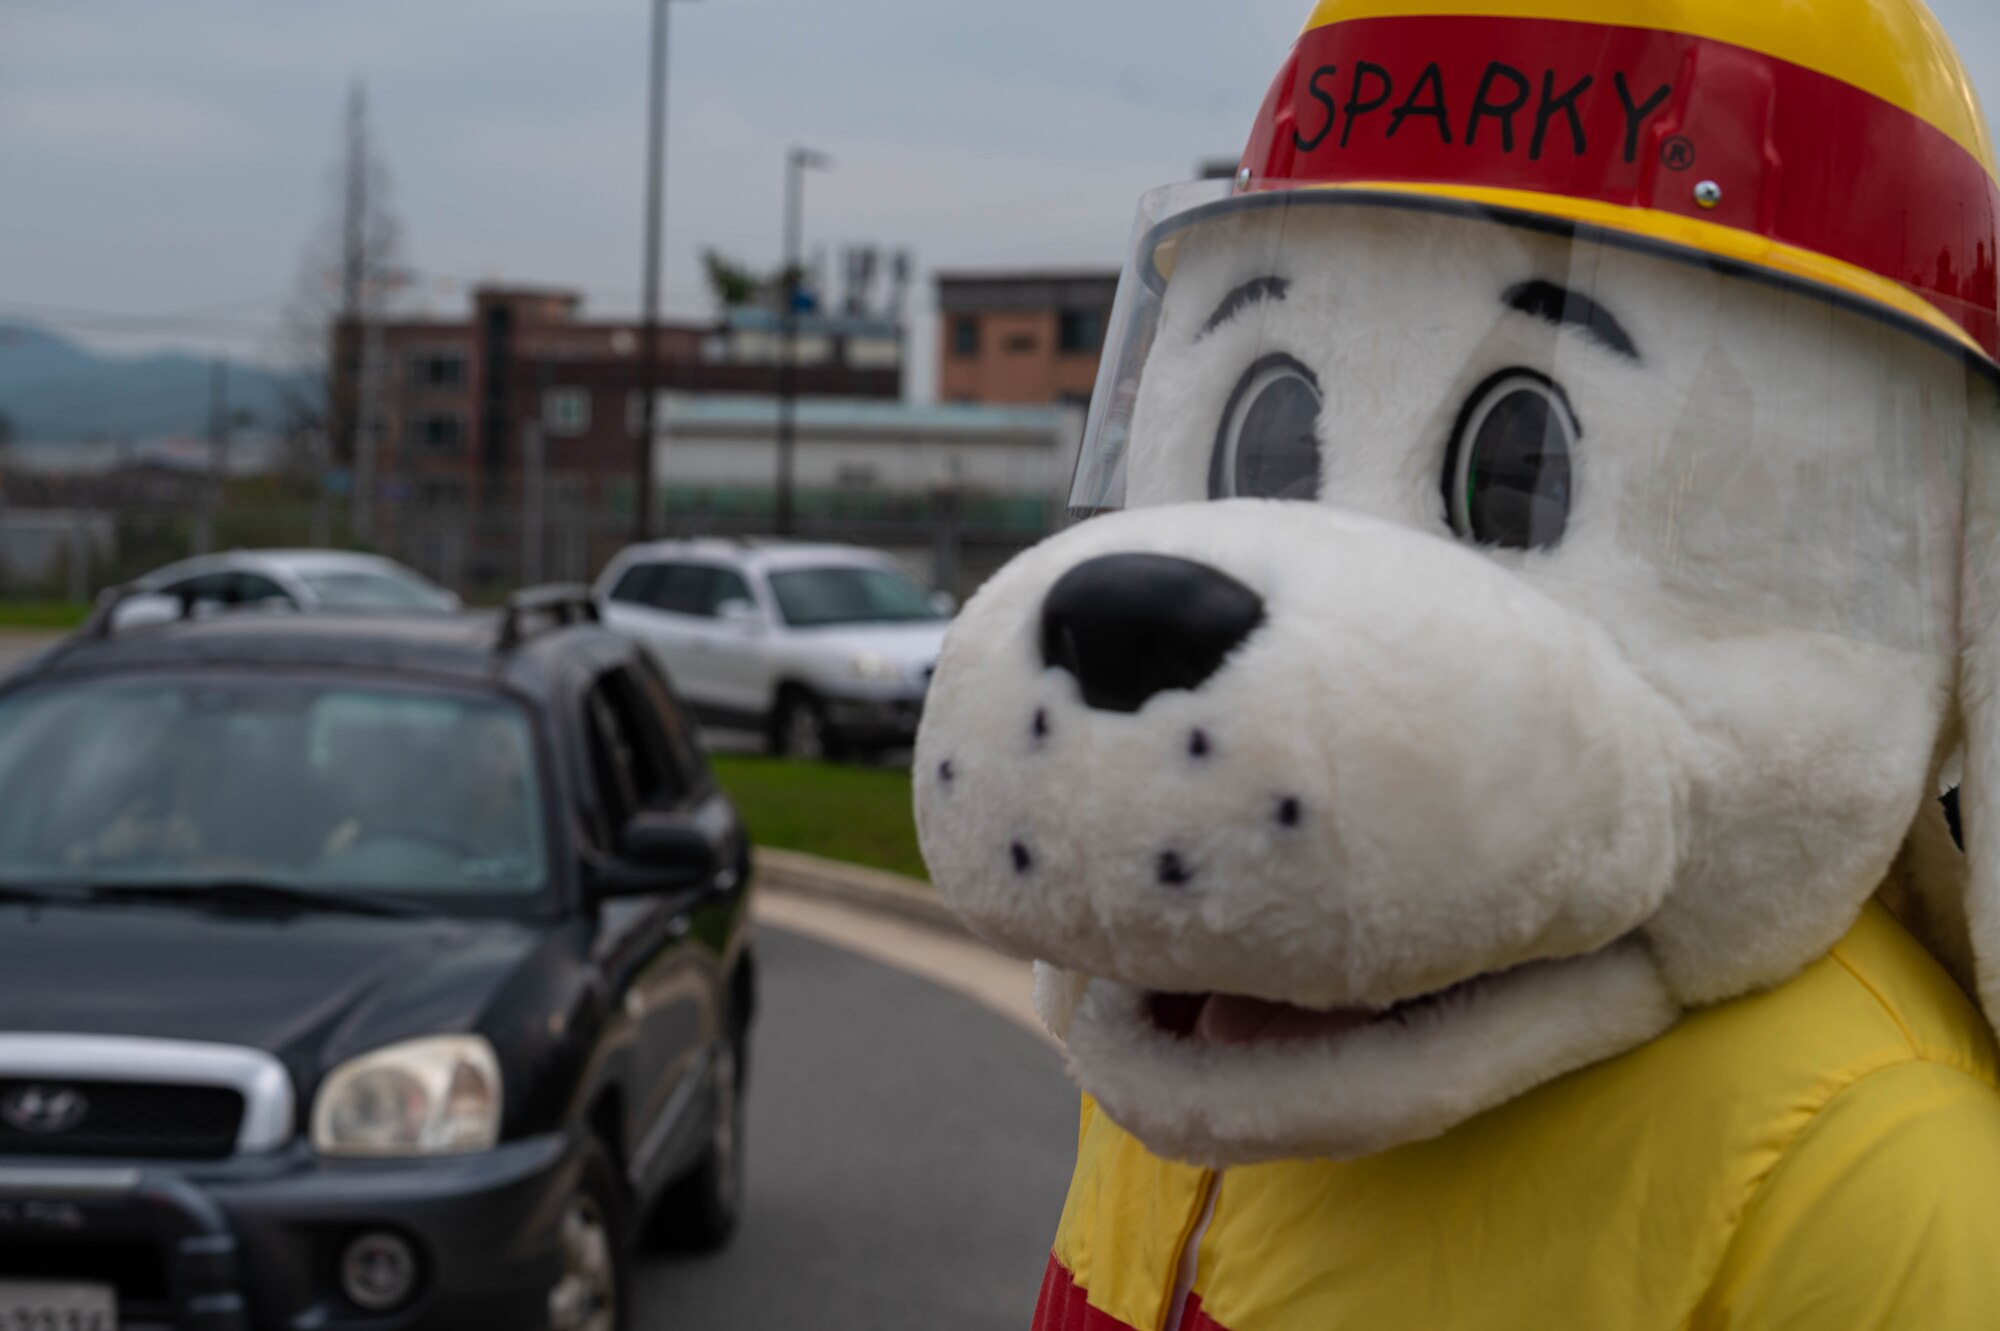 The 51st Fighter Wing Fire Department mascot “Sparky” stands outside the Morin Gate at Osan Air Base